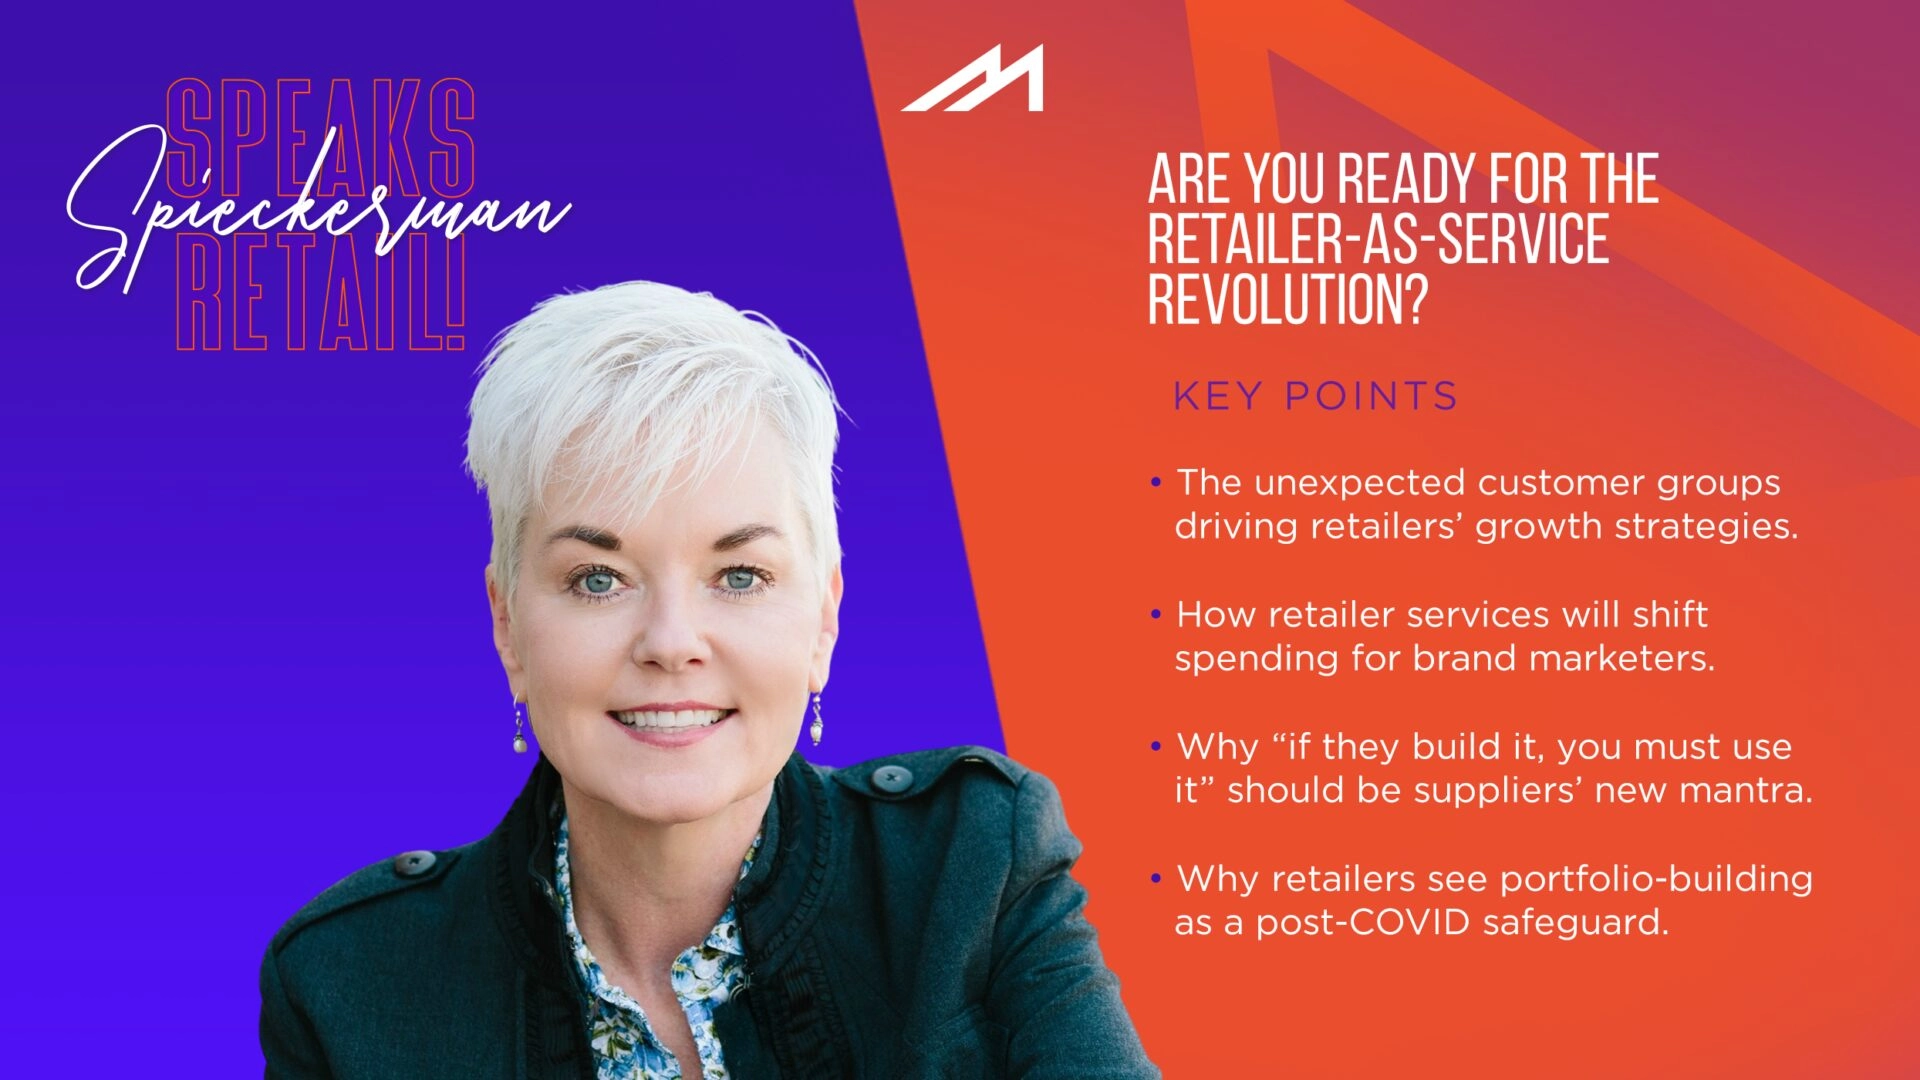 Are You Ready for the Retailer-as-Service Revolution?